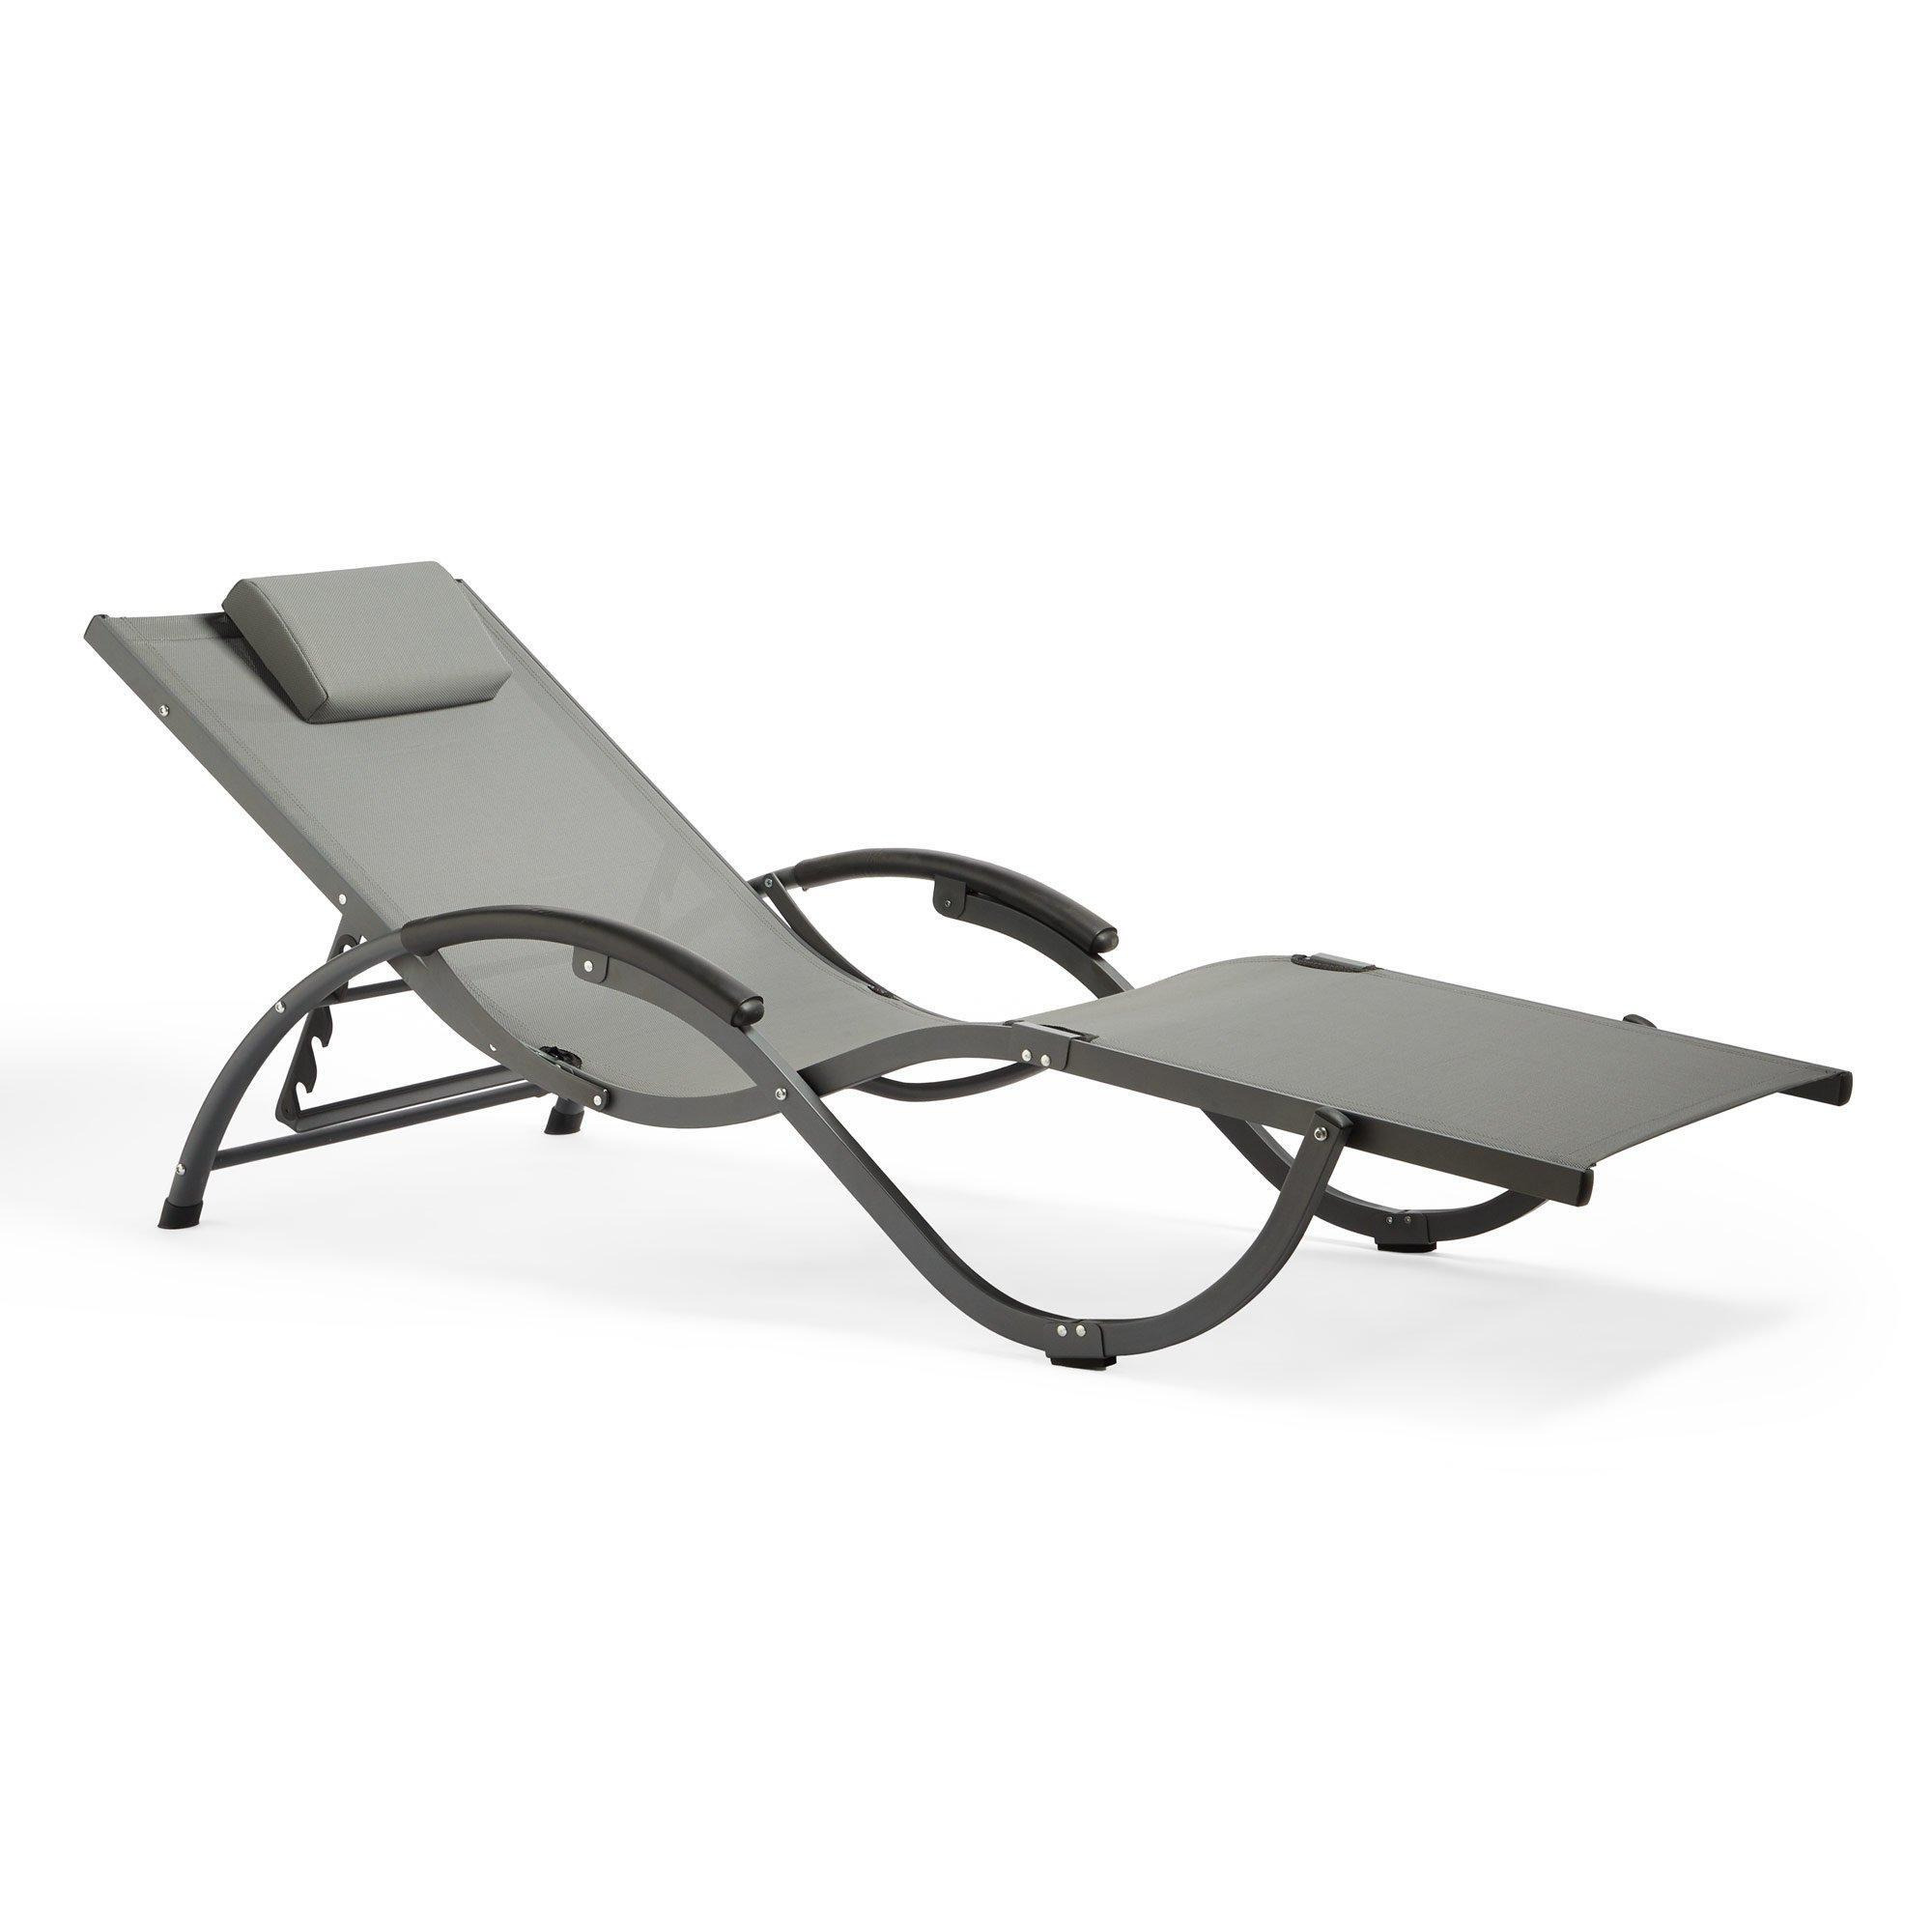 Outdoor Reclinable Textoline Folding Sunloungers - image 1